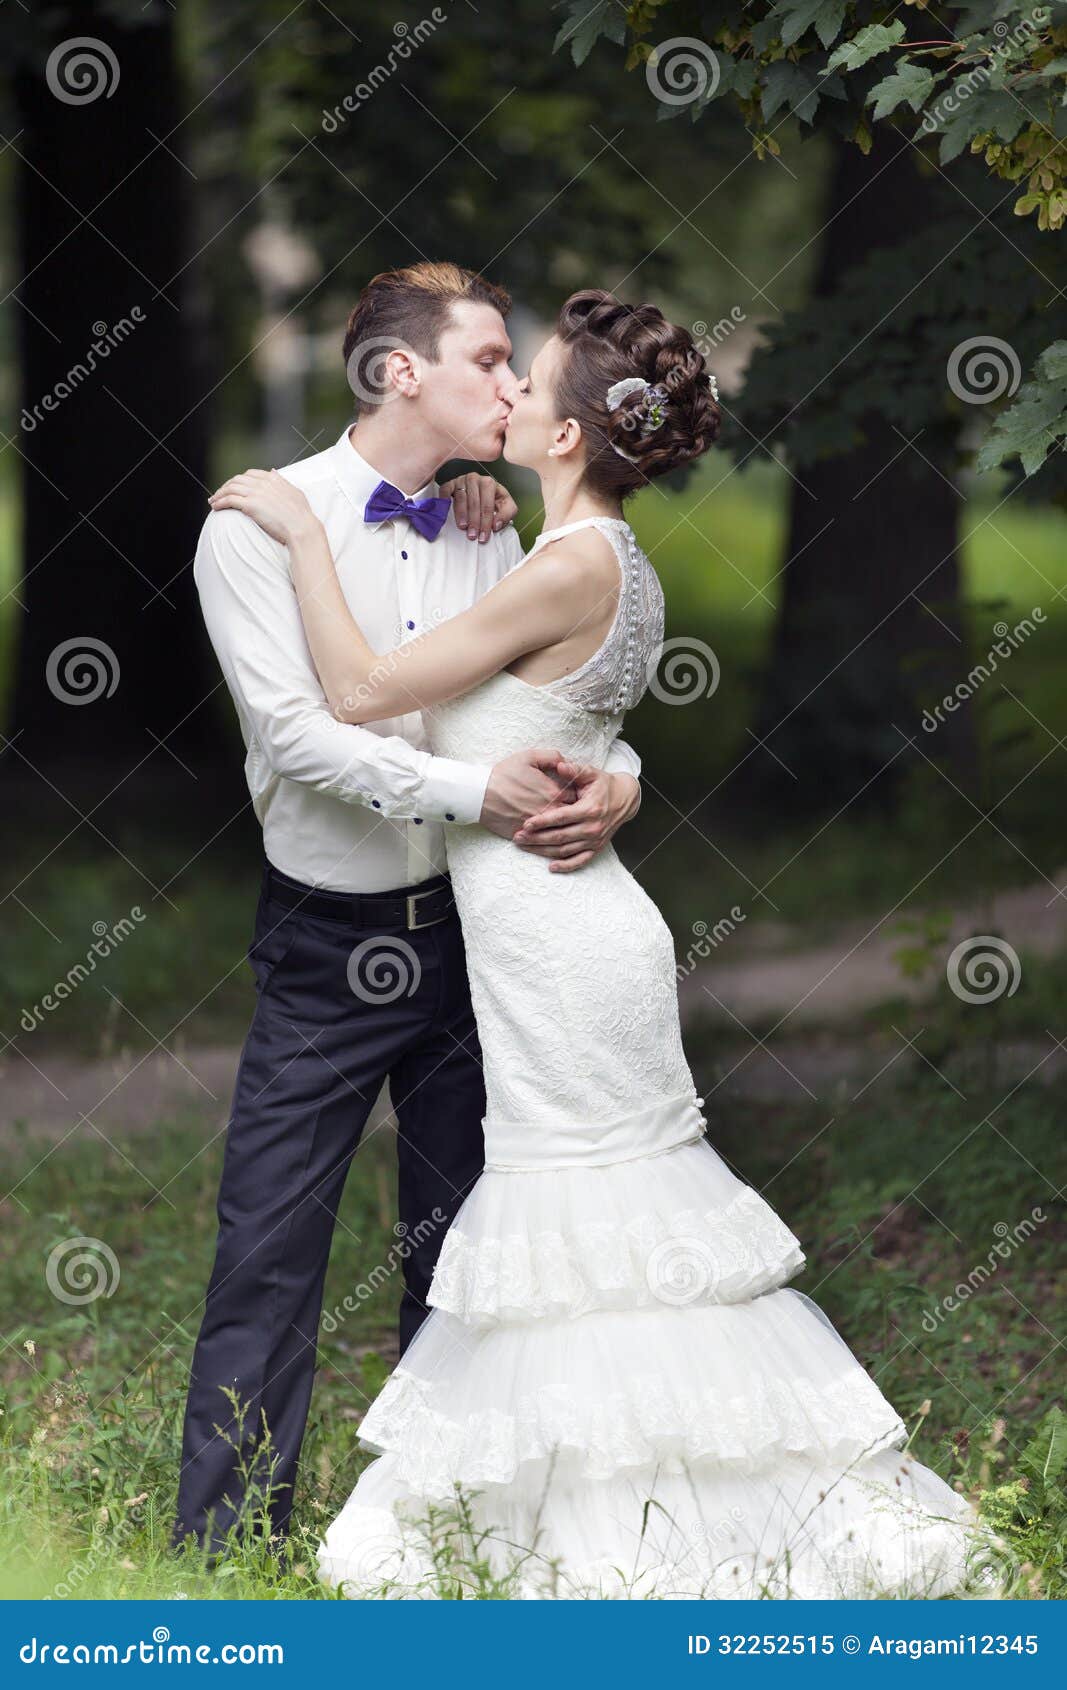 Just Married Couple Kissing Stock Image Image Of Adult